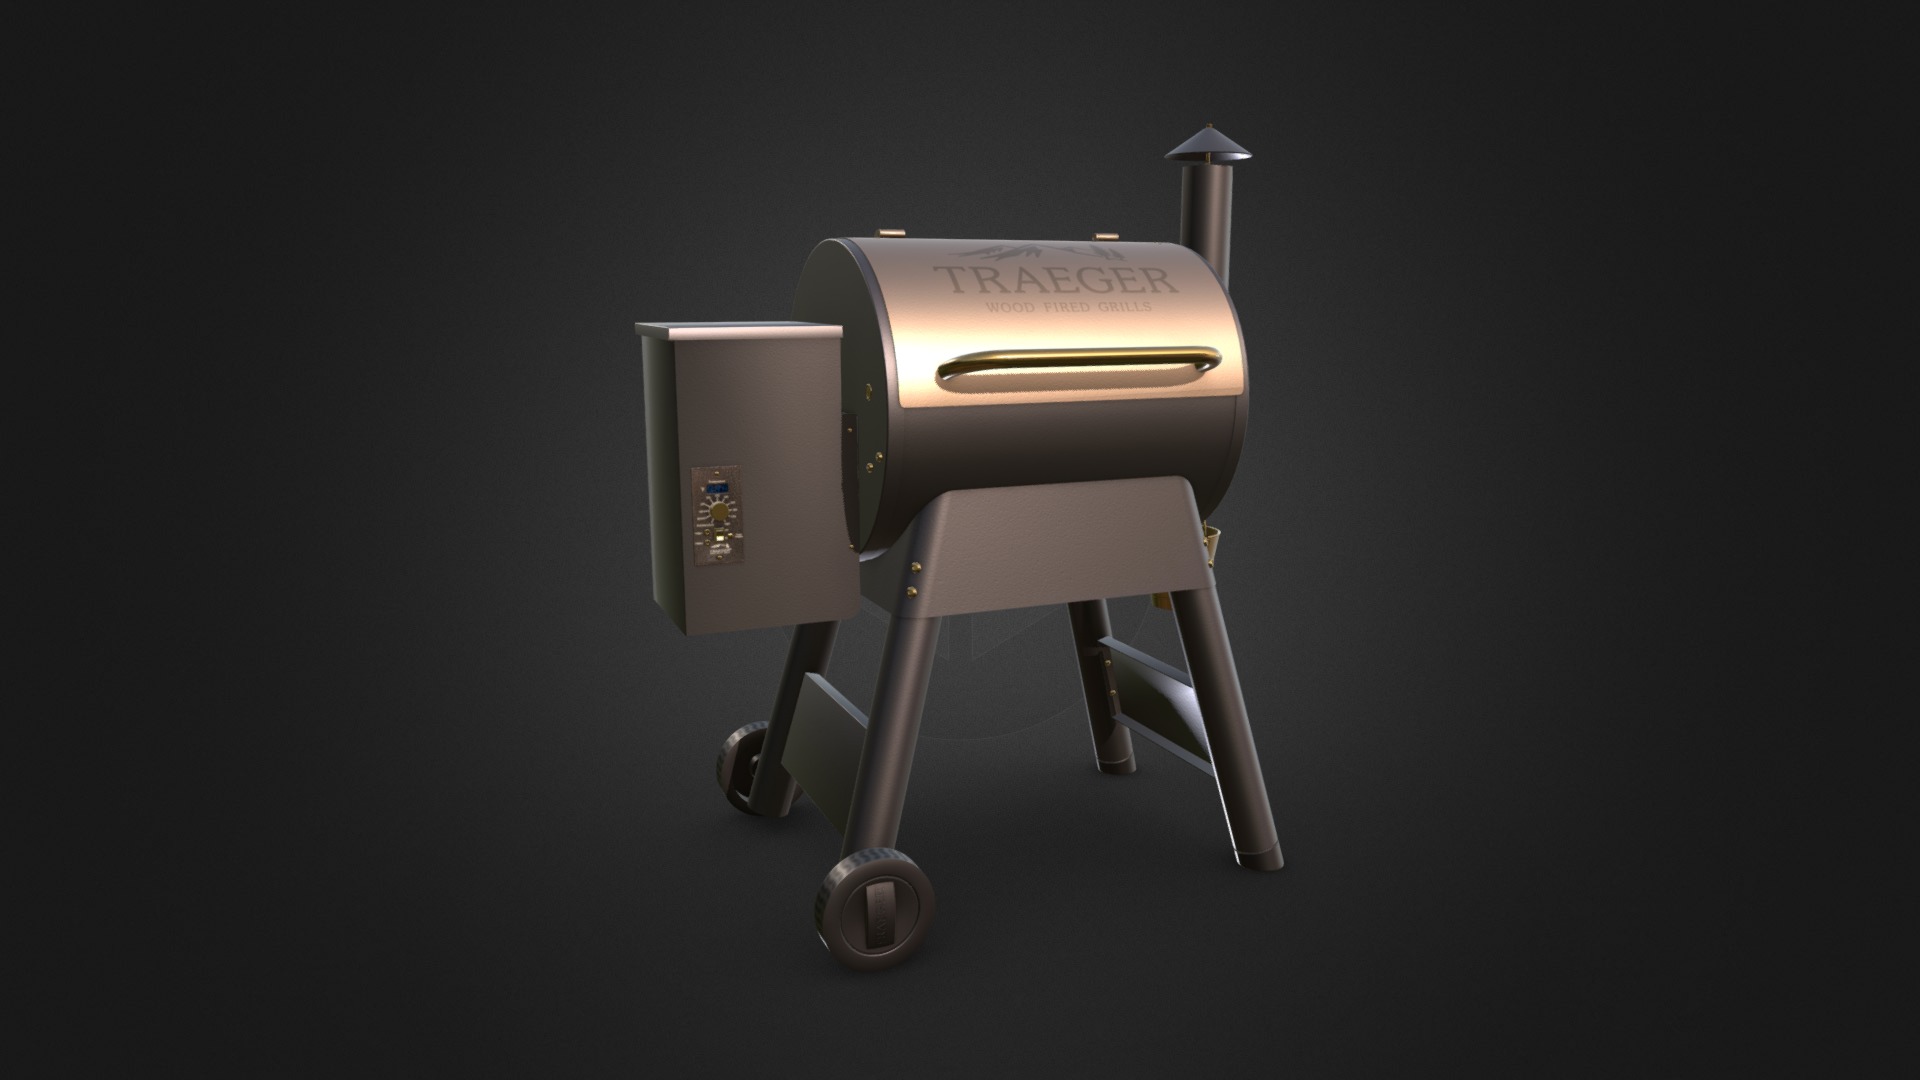 3D model Traeger Pro Series - This is a 3D model of the Traeger Pro Series. The 3D model is about a small metal device.